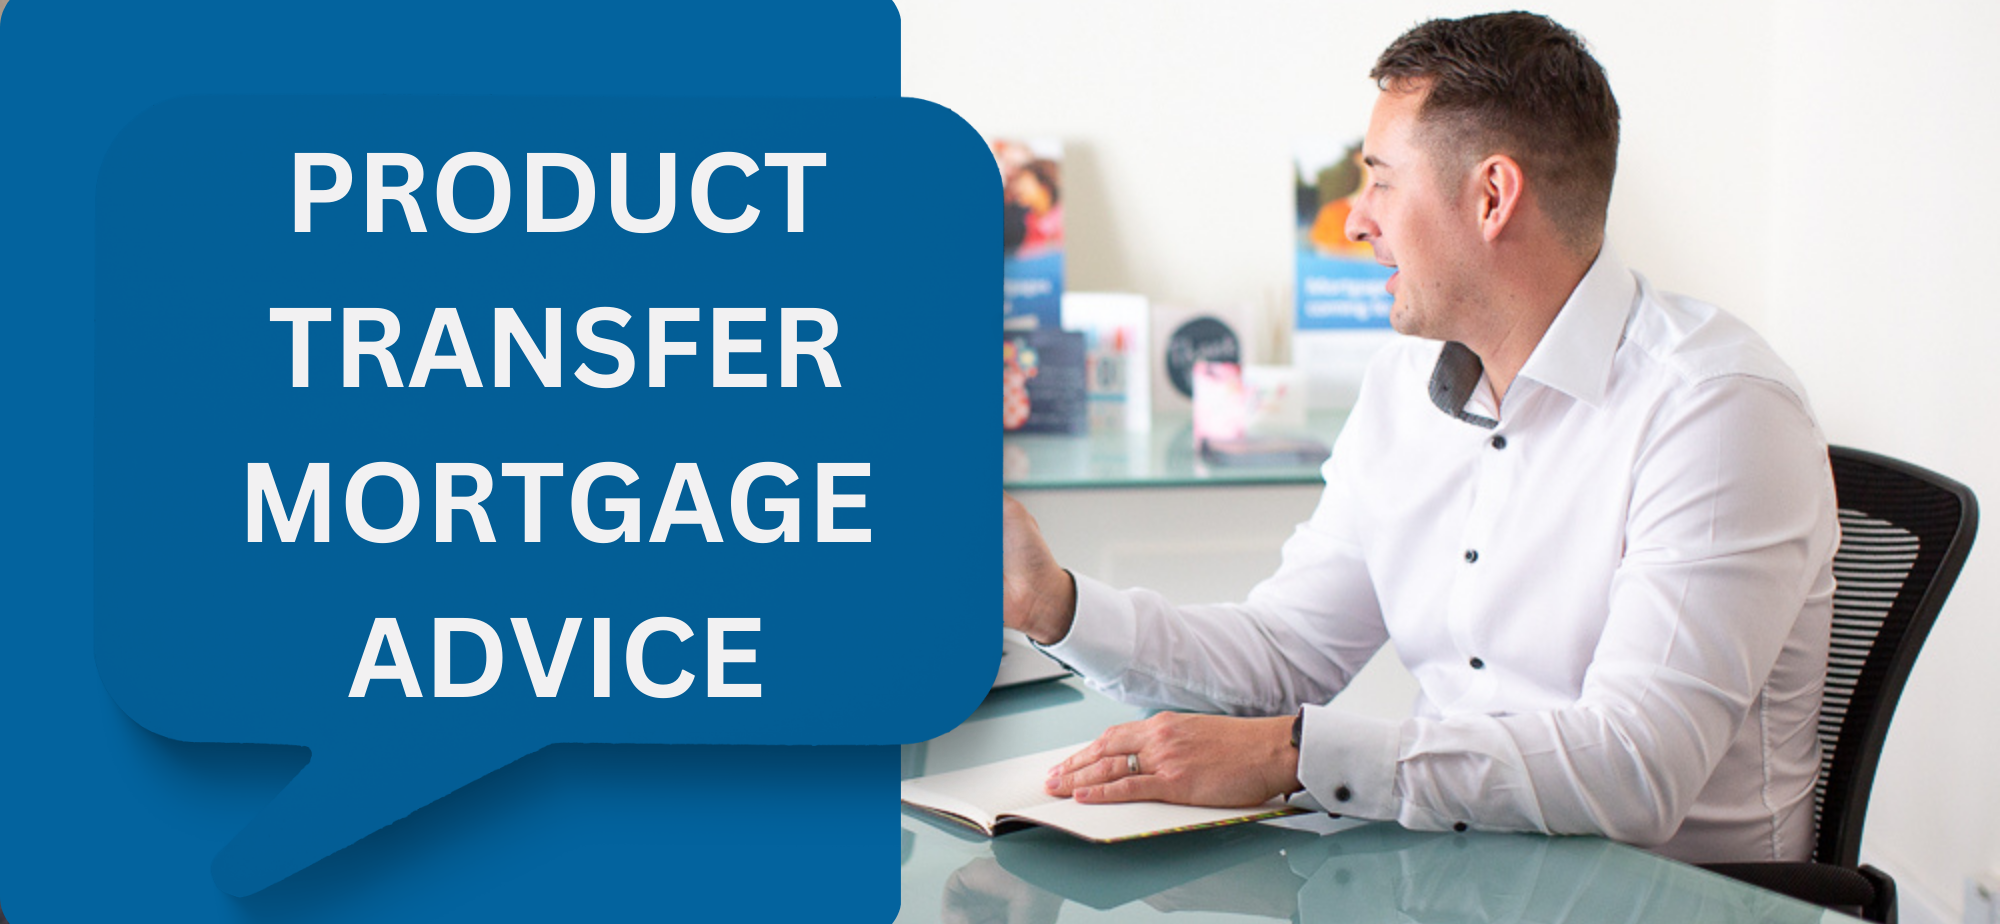 Product transfer mortgage advice